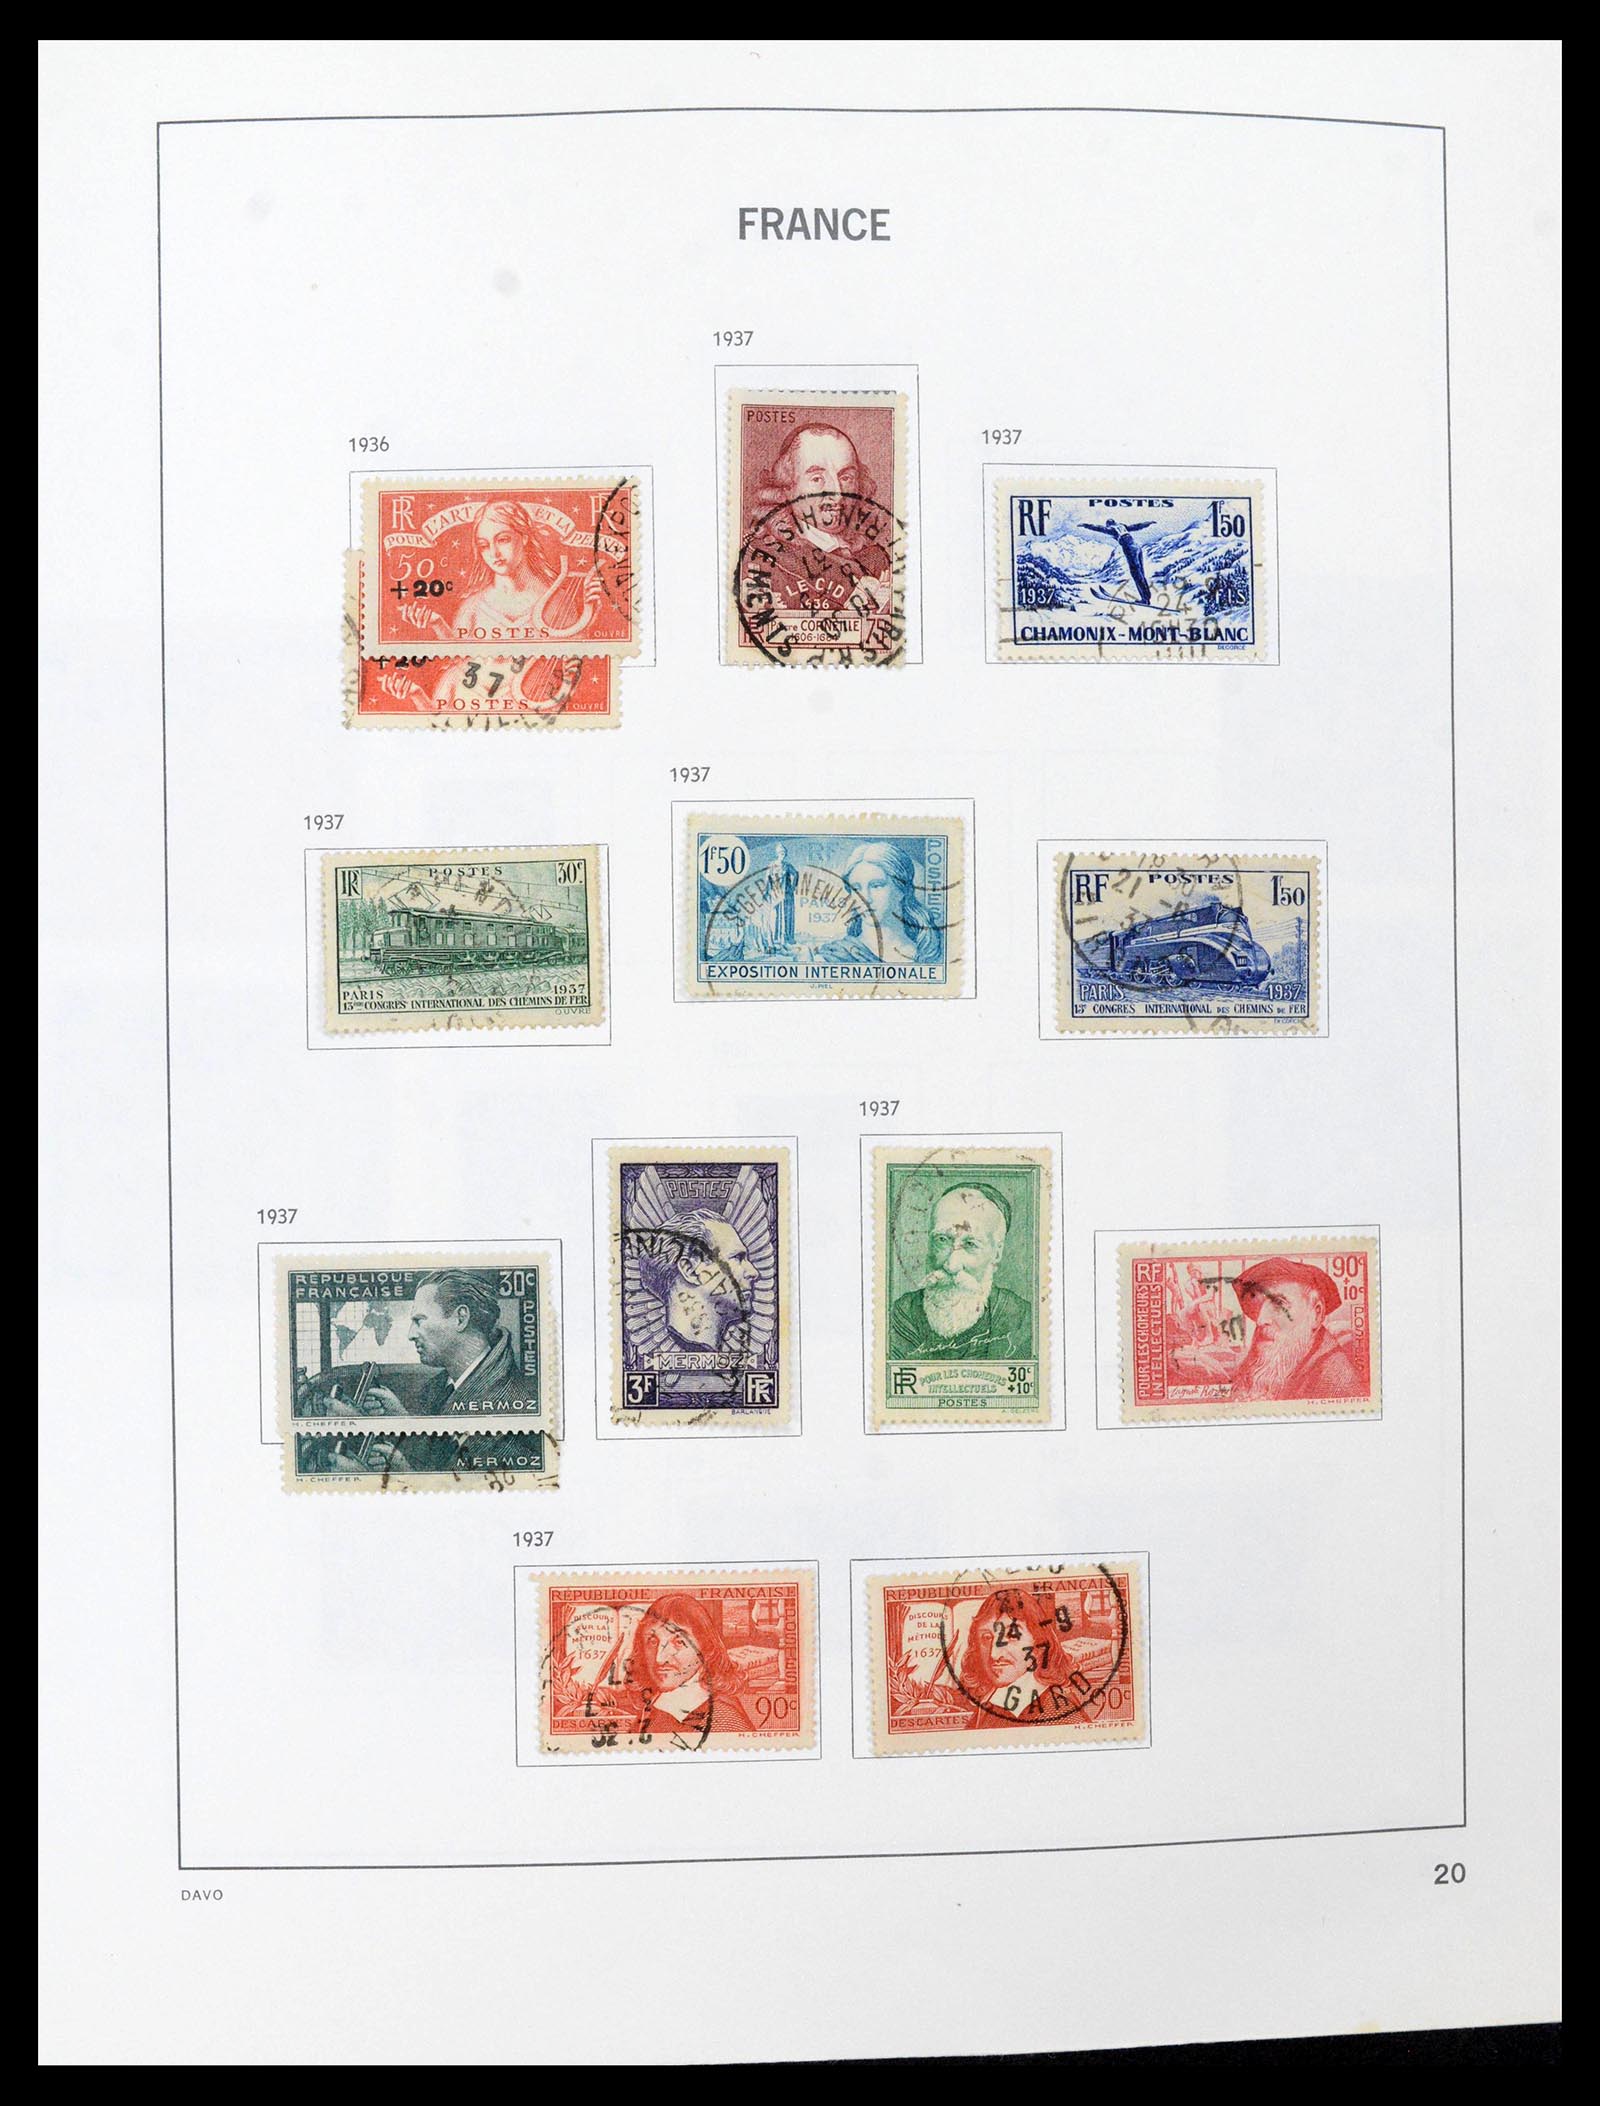 39164 0020 - Stamp collection 39164 France 1849-1981.